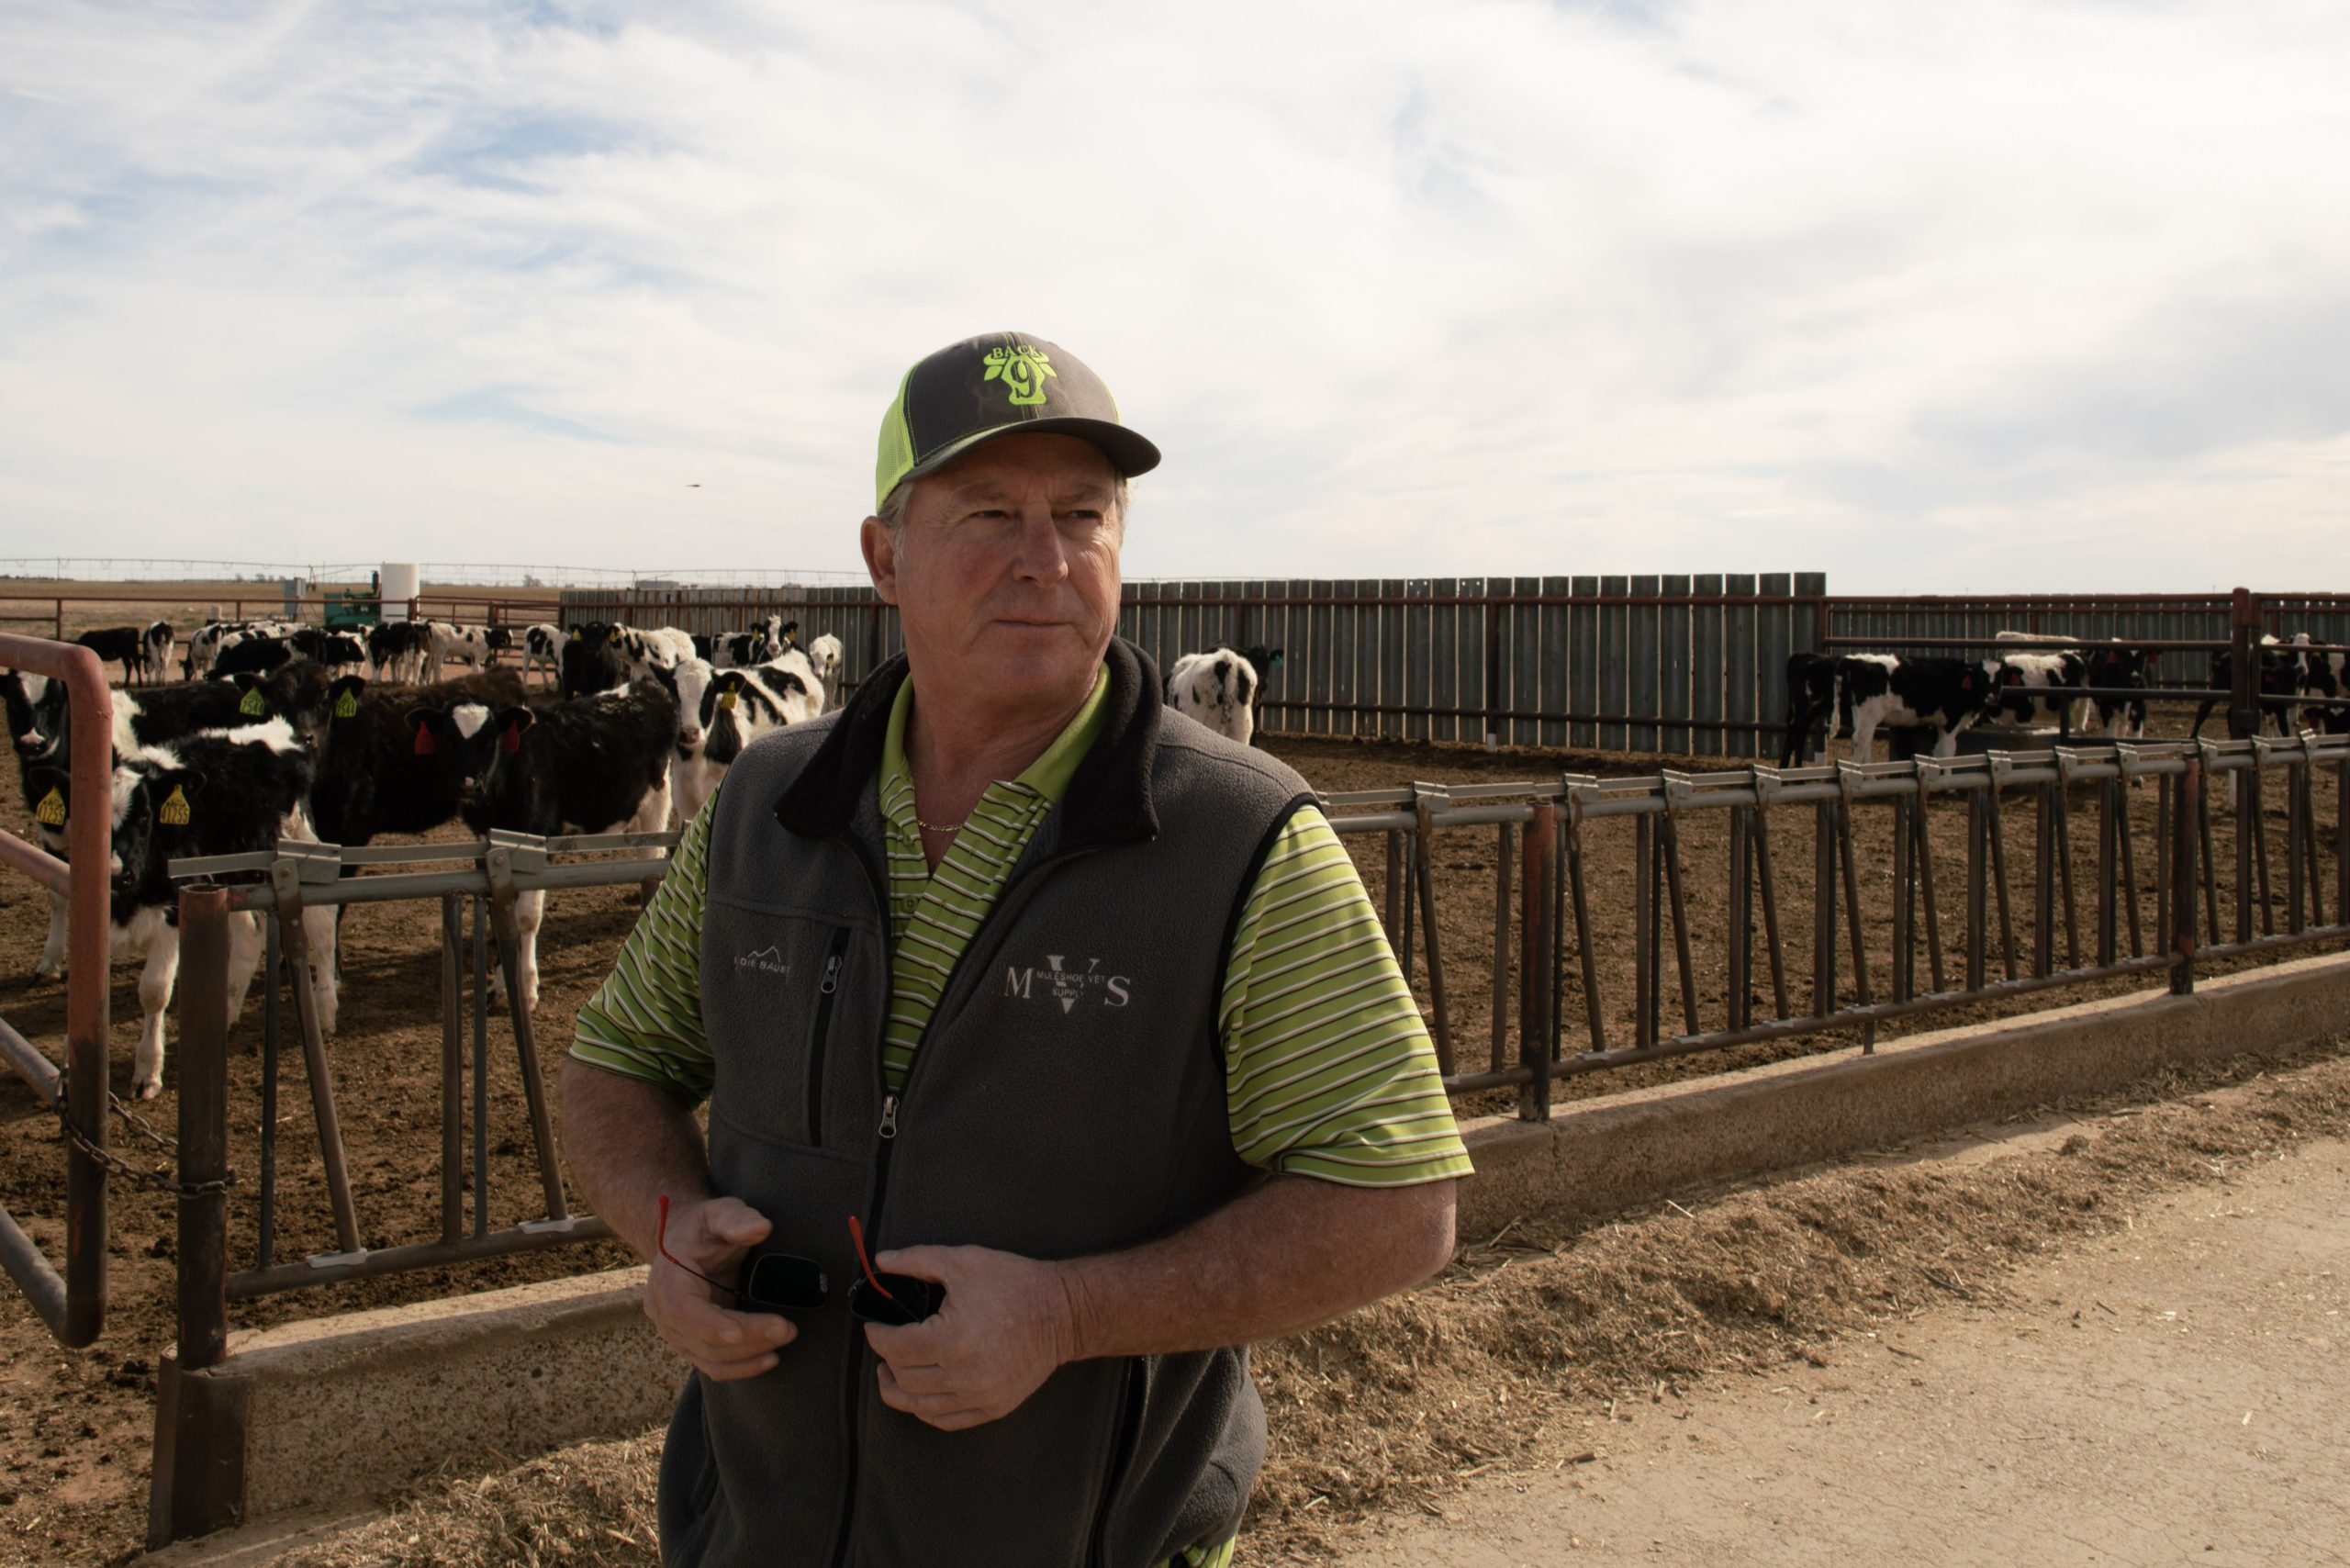 Groundwater contamination devastates a New Mexico dairy – and threatens public health